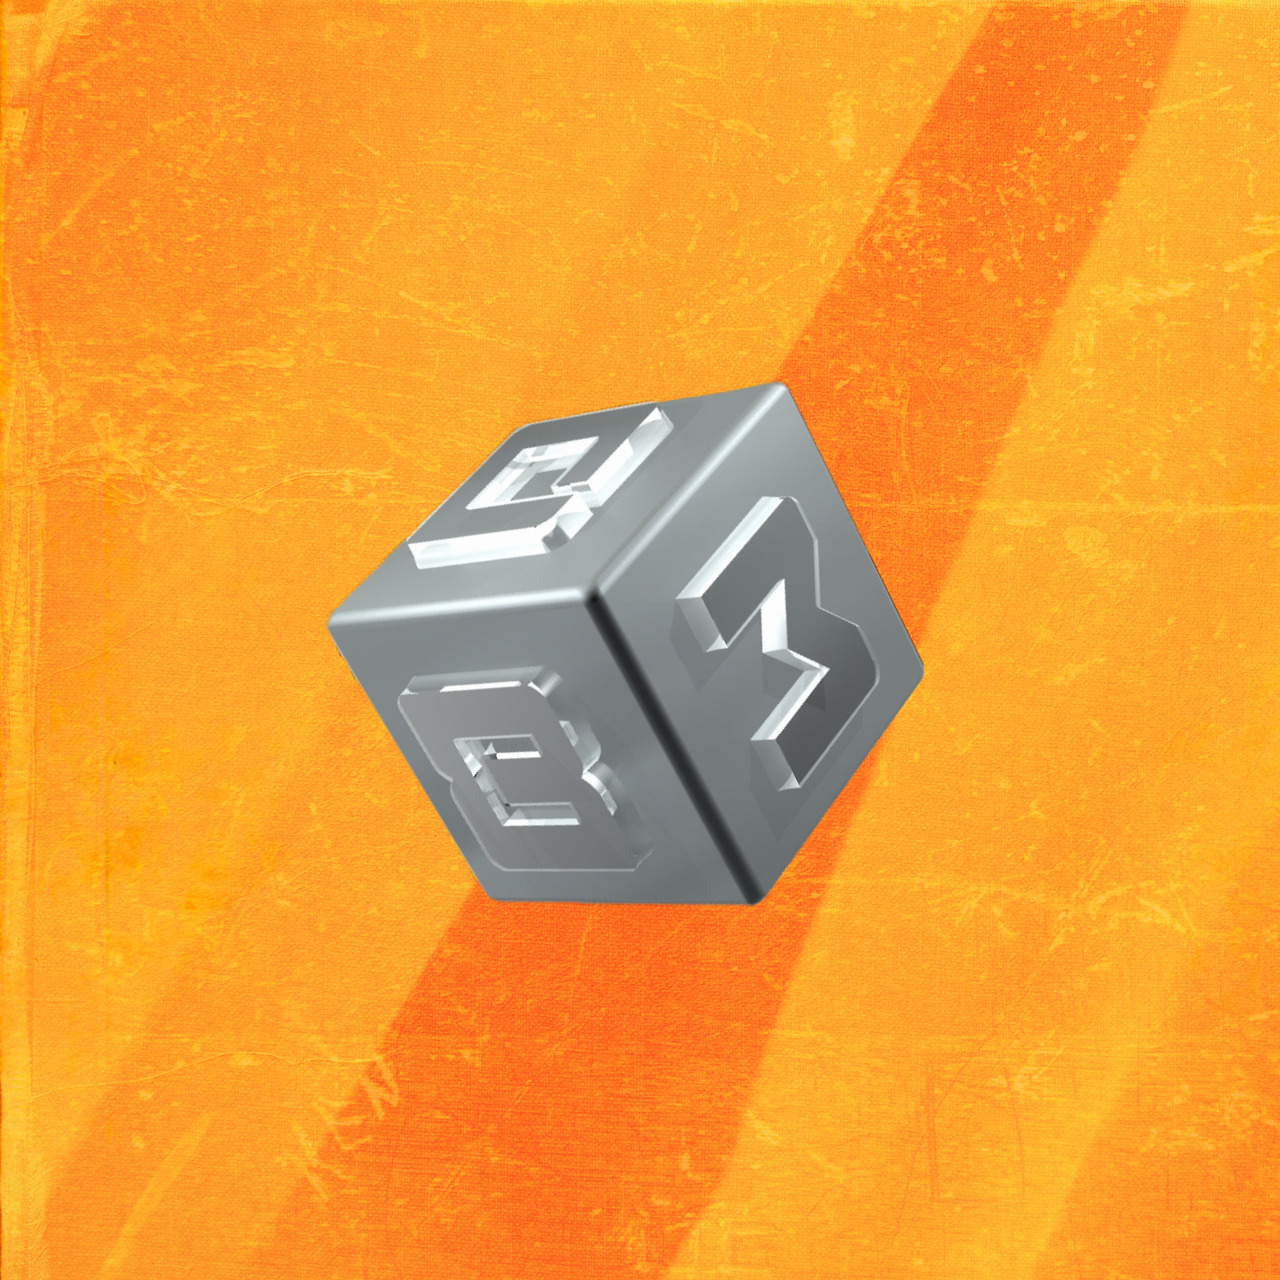 bycacioppo — 3D LOGO DESIGN : “THE CUBE” CLIENT: THE REACH TV